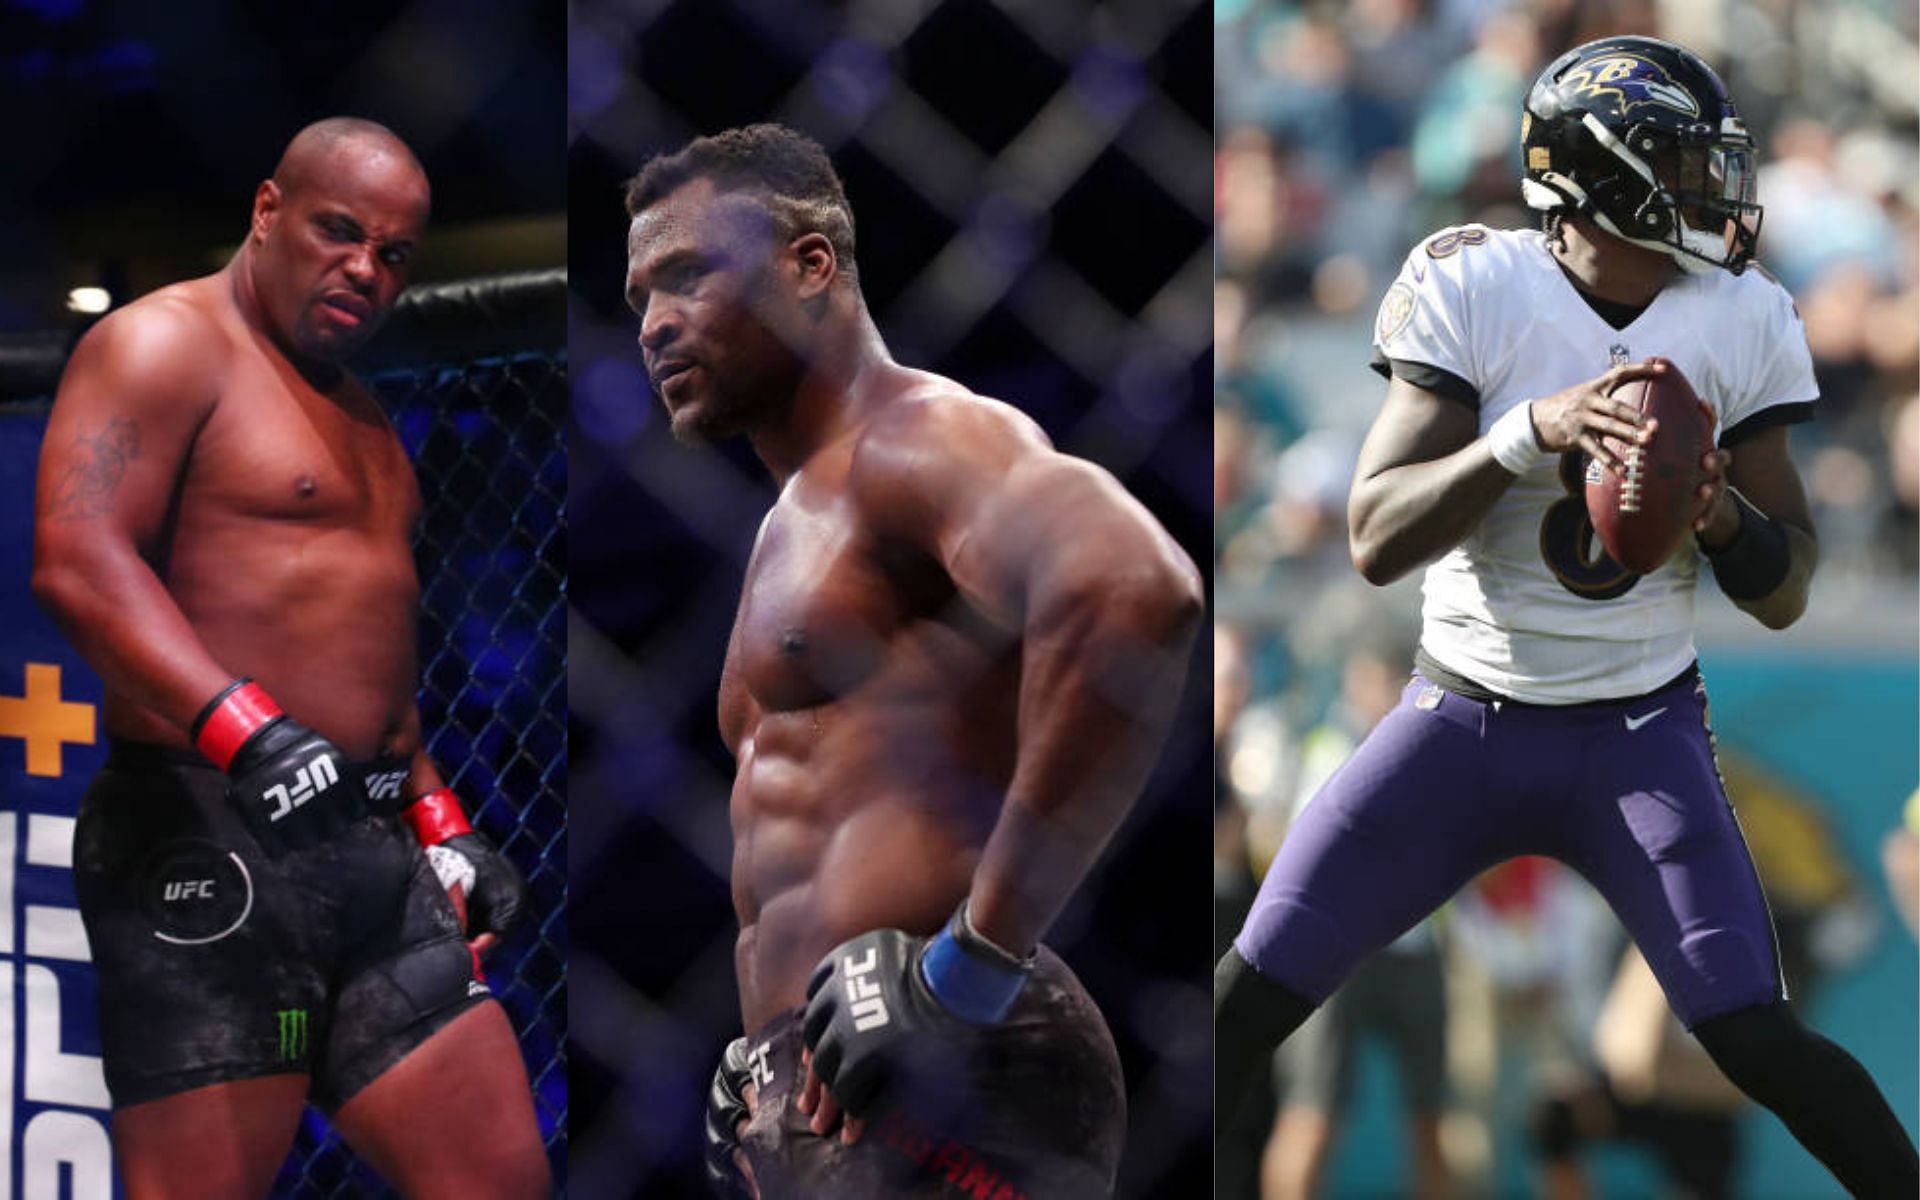 From left to right: Daniel Cormier, Francis Ngannou, and Lamar Jackson